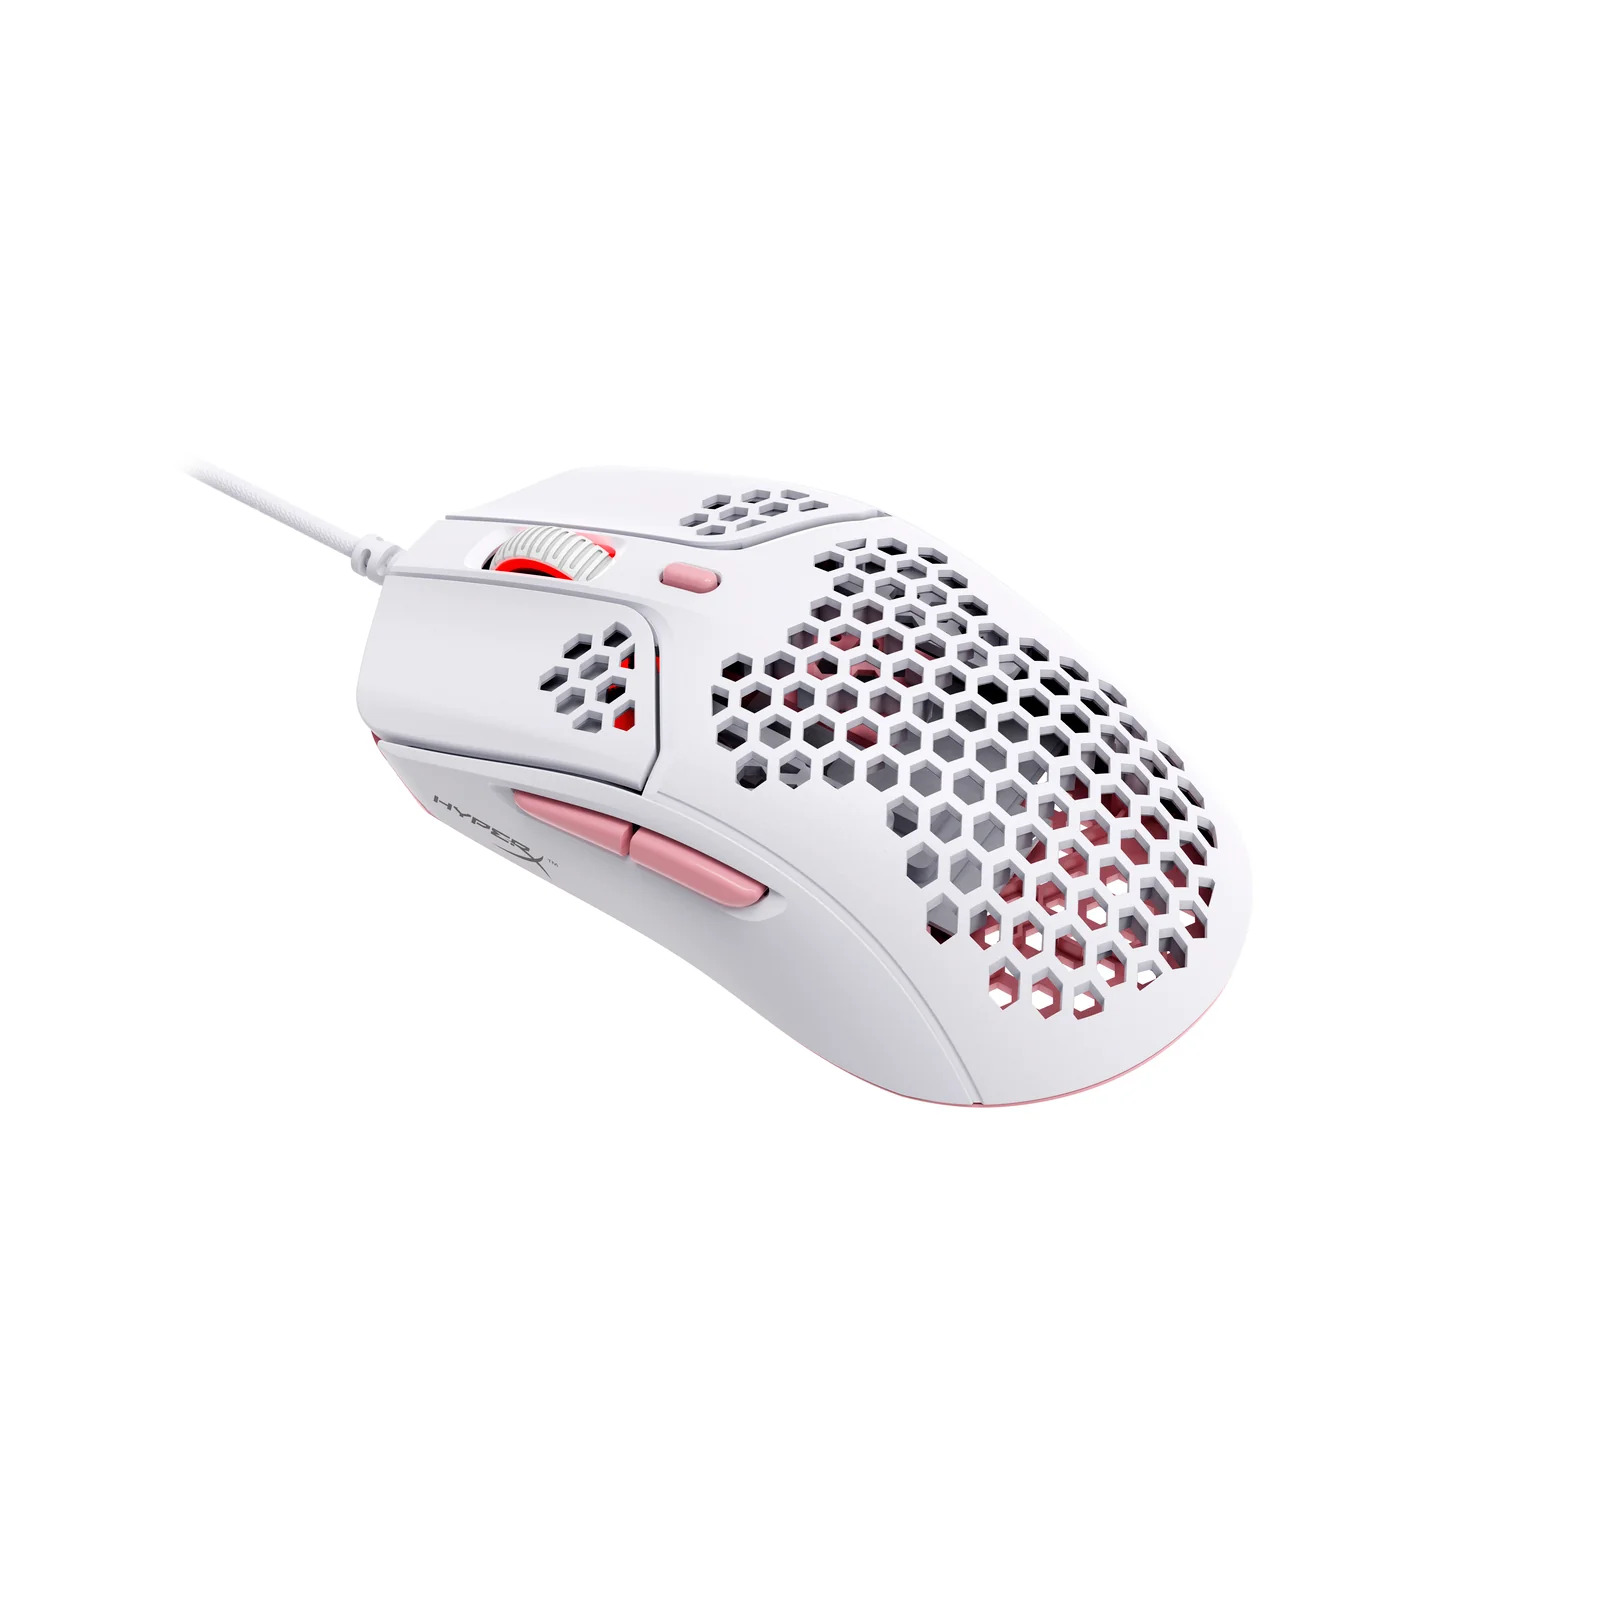 HyperX Pulsefire Haste Ultra Lightweight Wired Gaming Mouse Pink & White 4P5E4AA